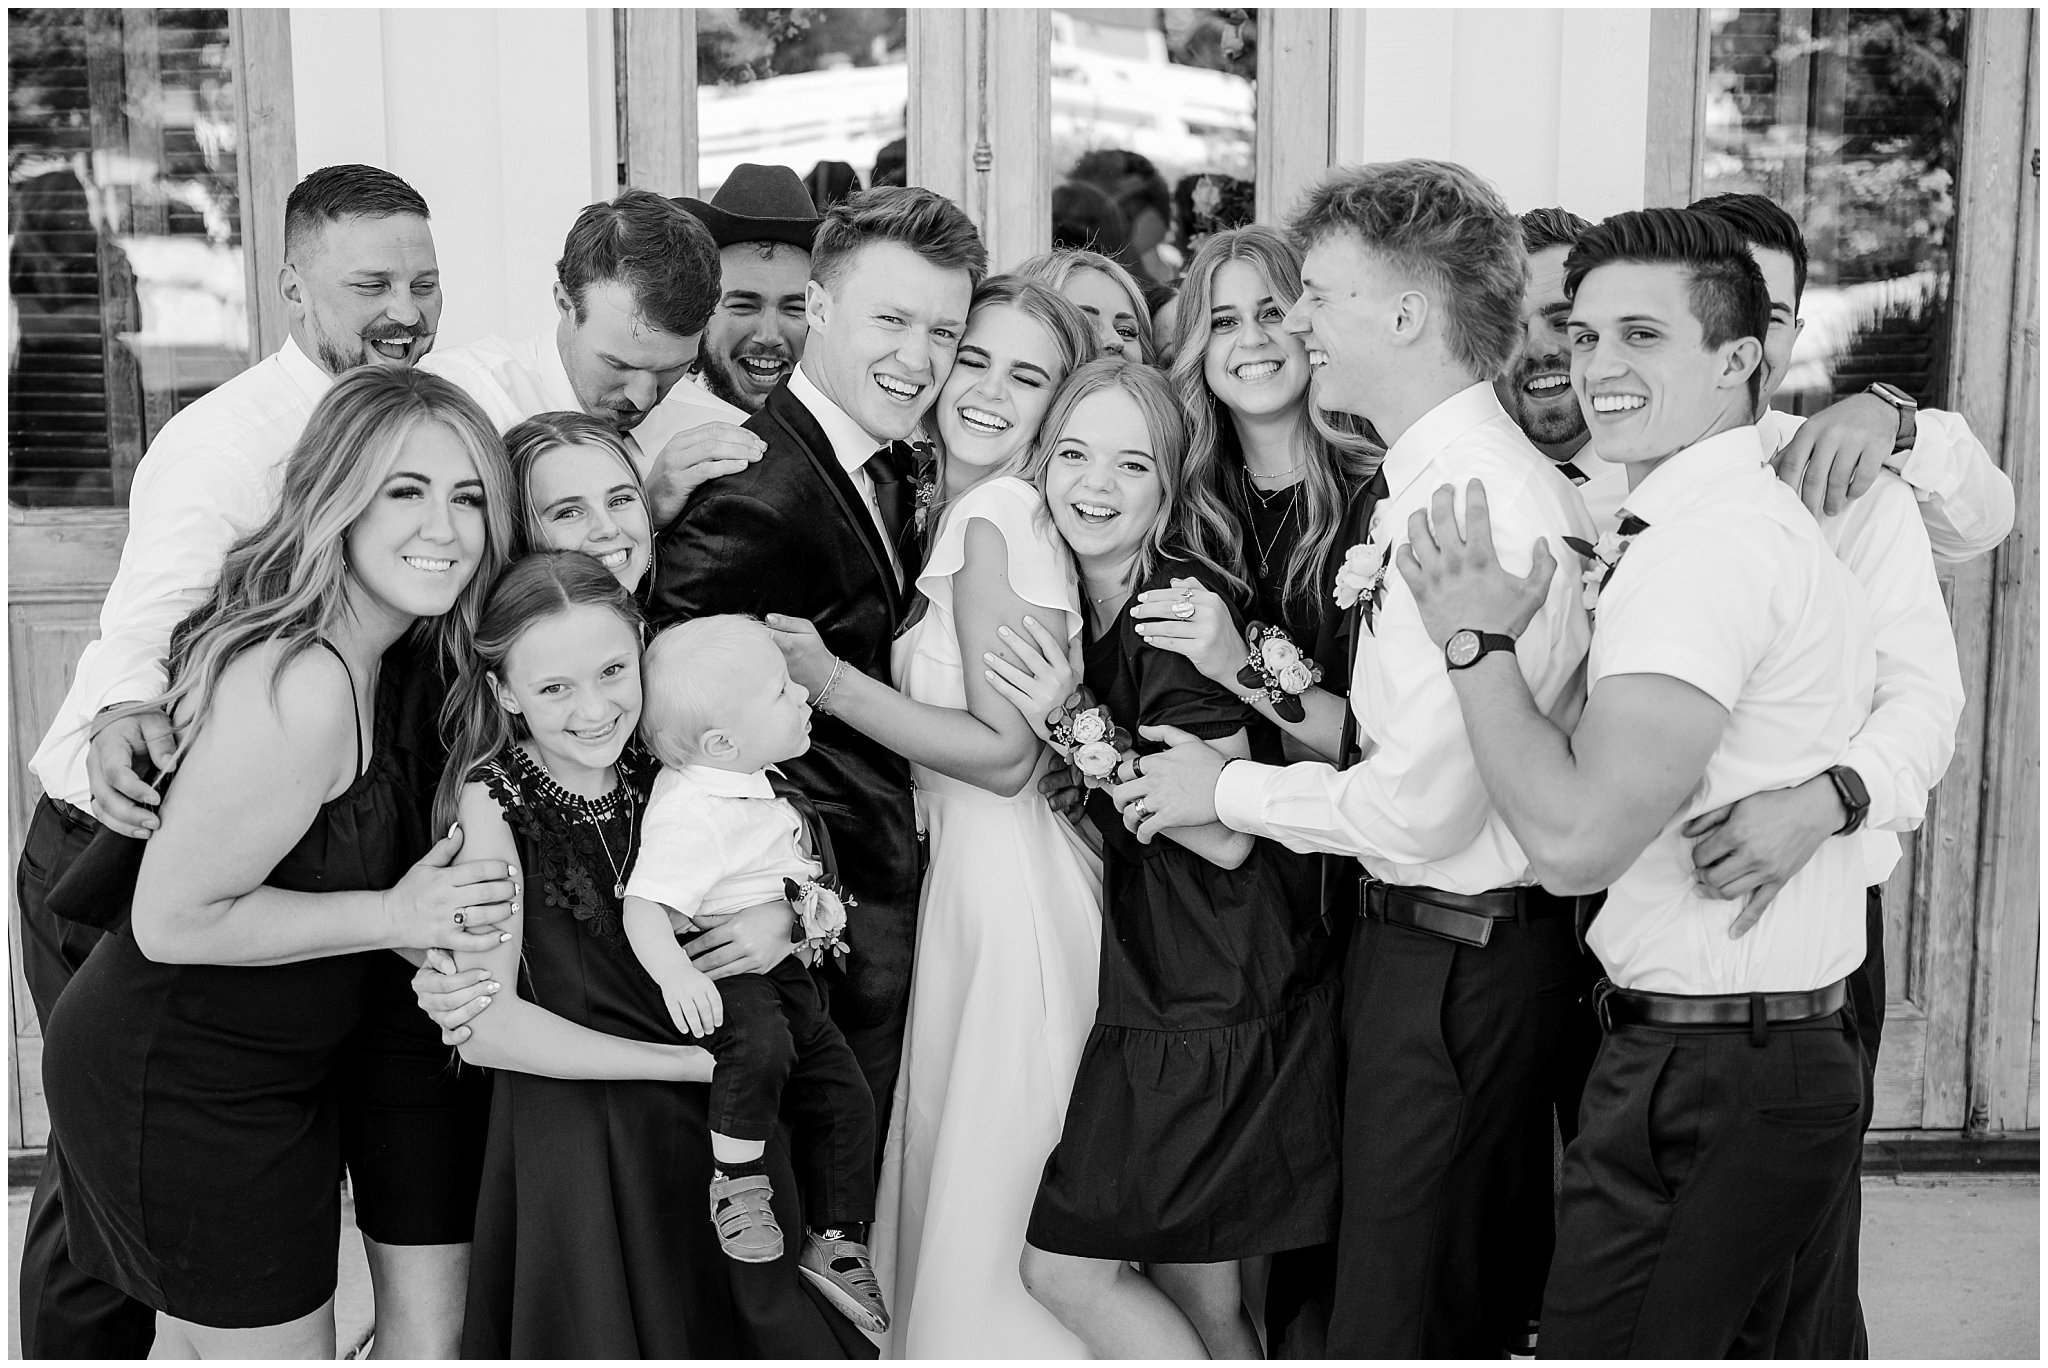 Wedding party portraits wearing black and white